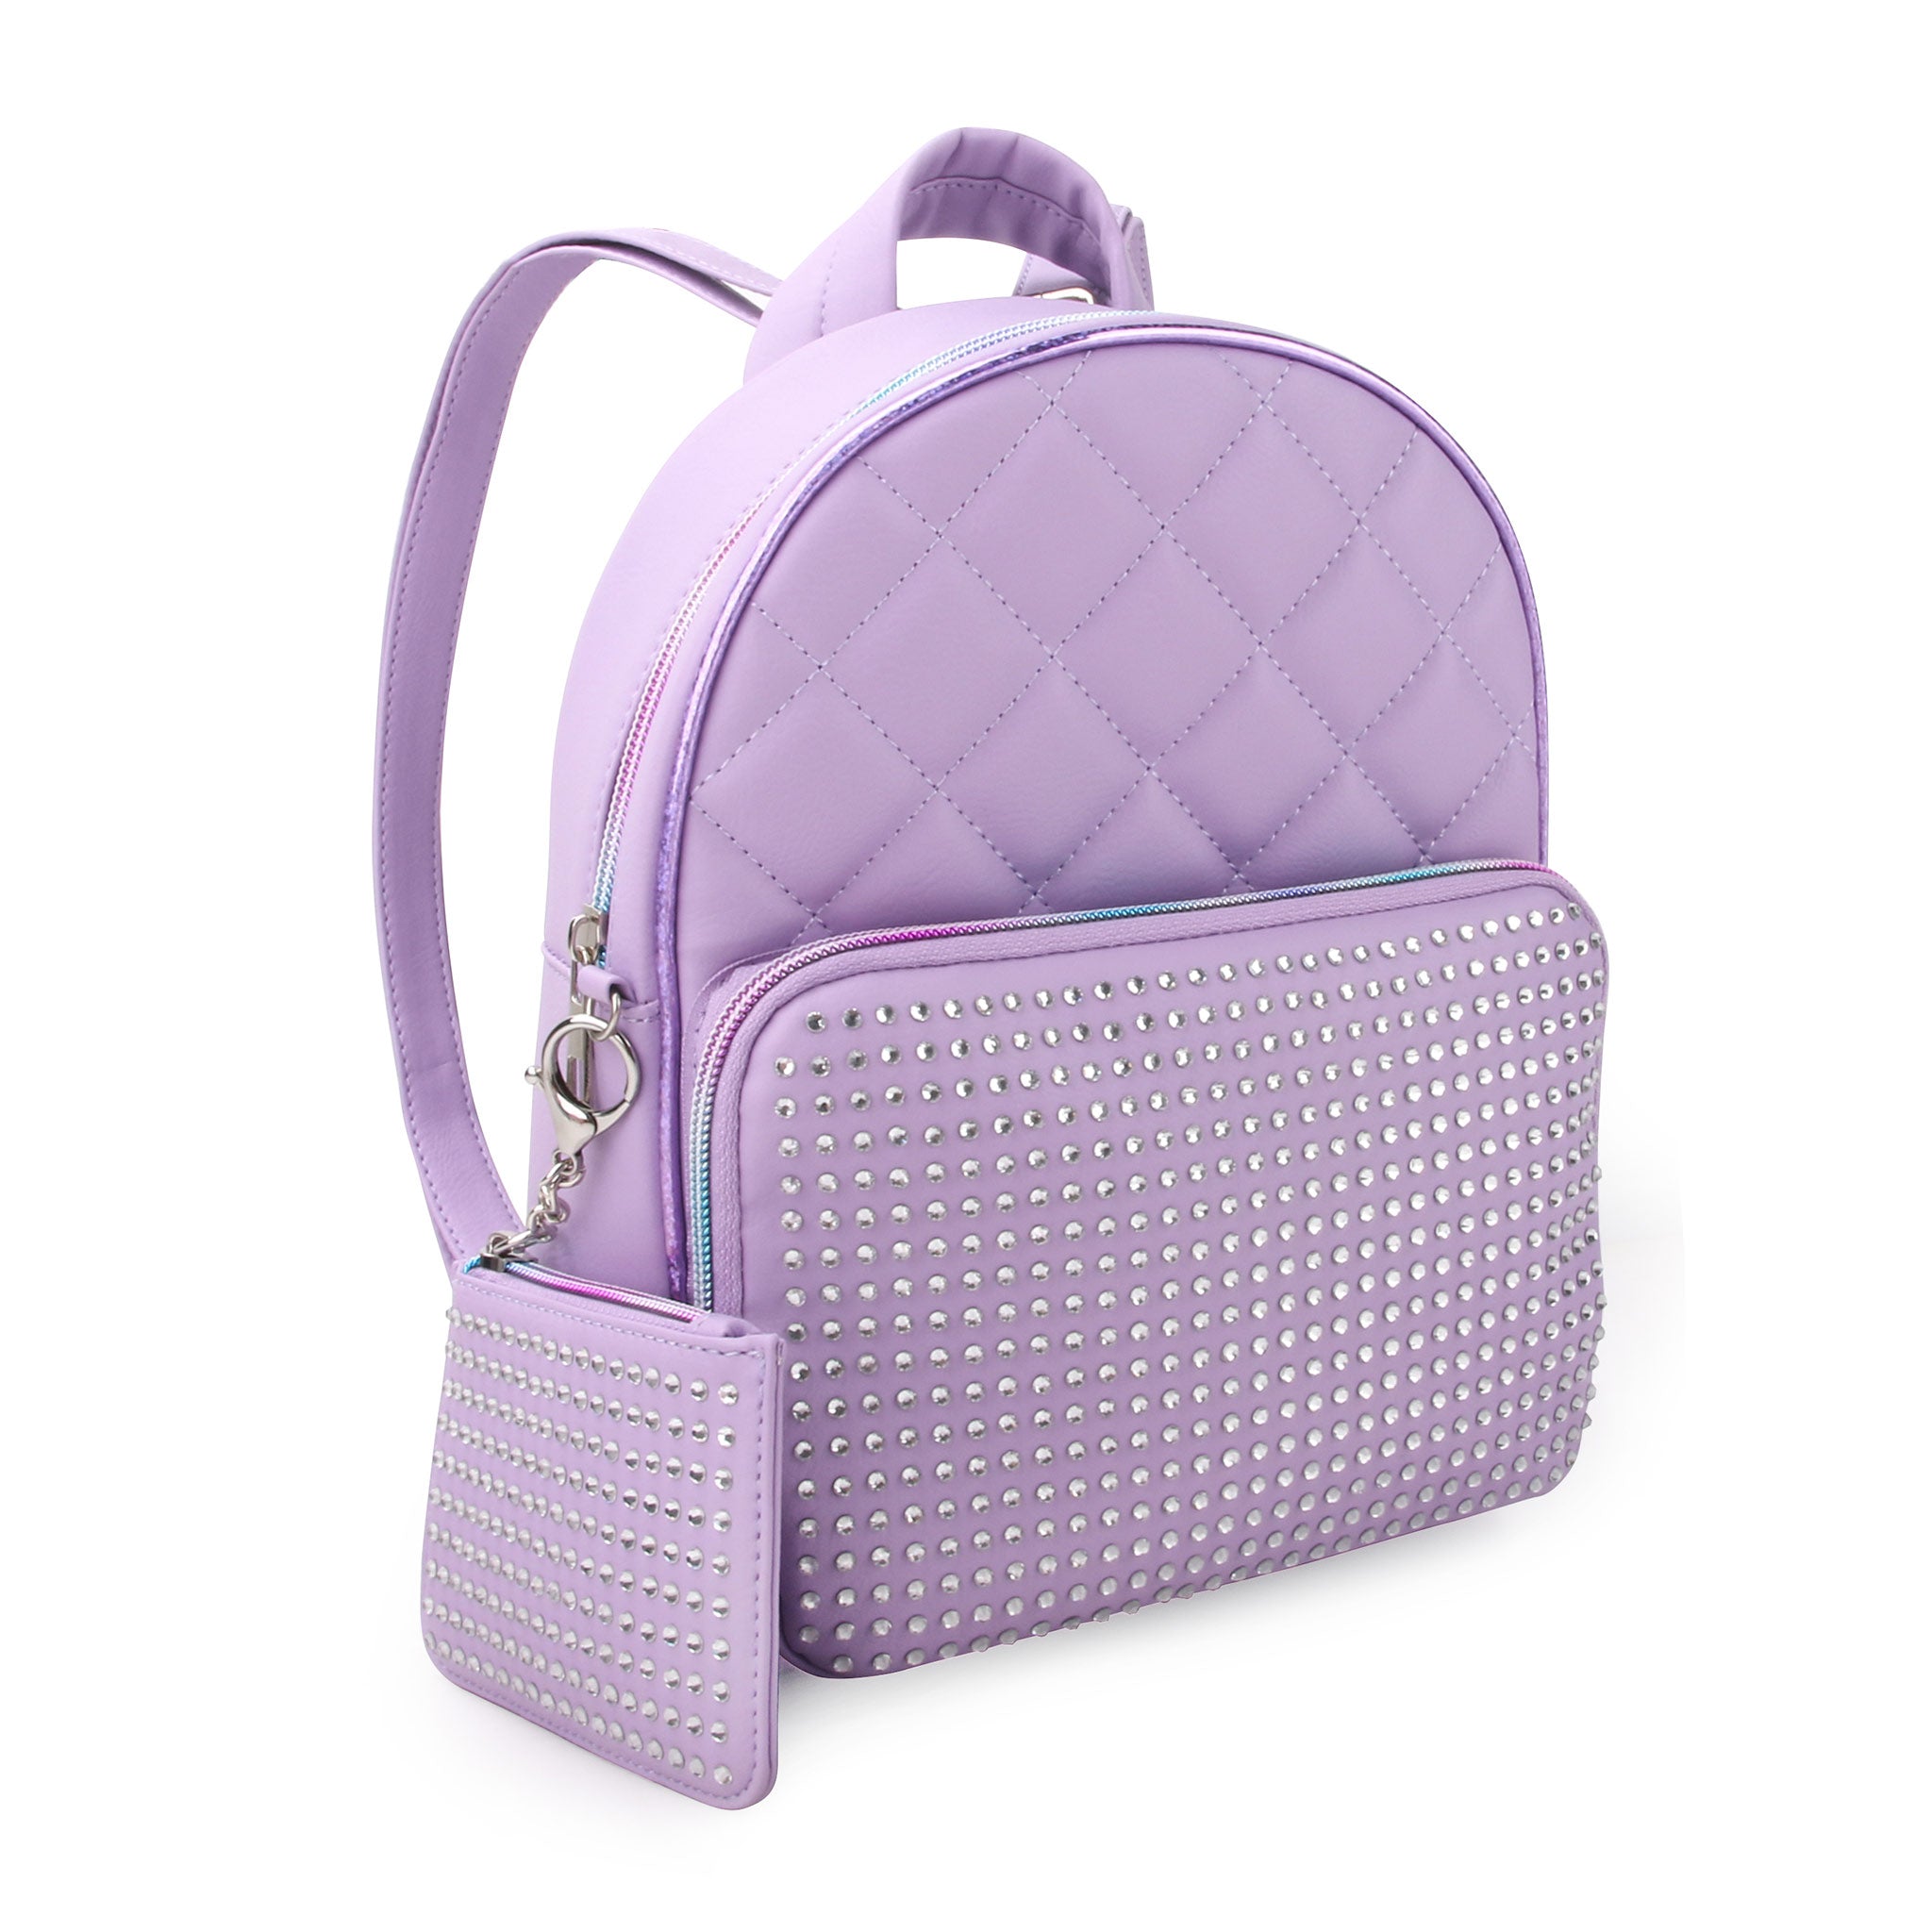 Side view of purple quilted mini backpack covered in rhinestones with rhinestone coin purse